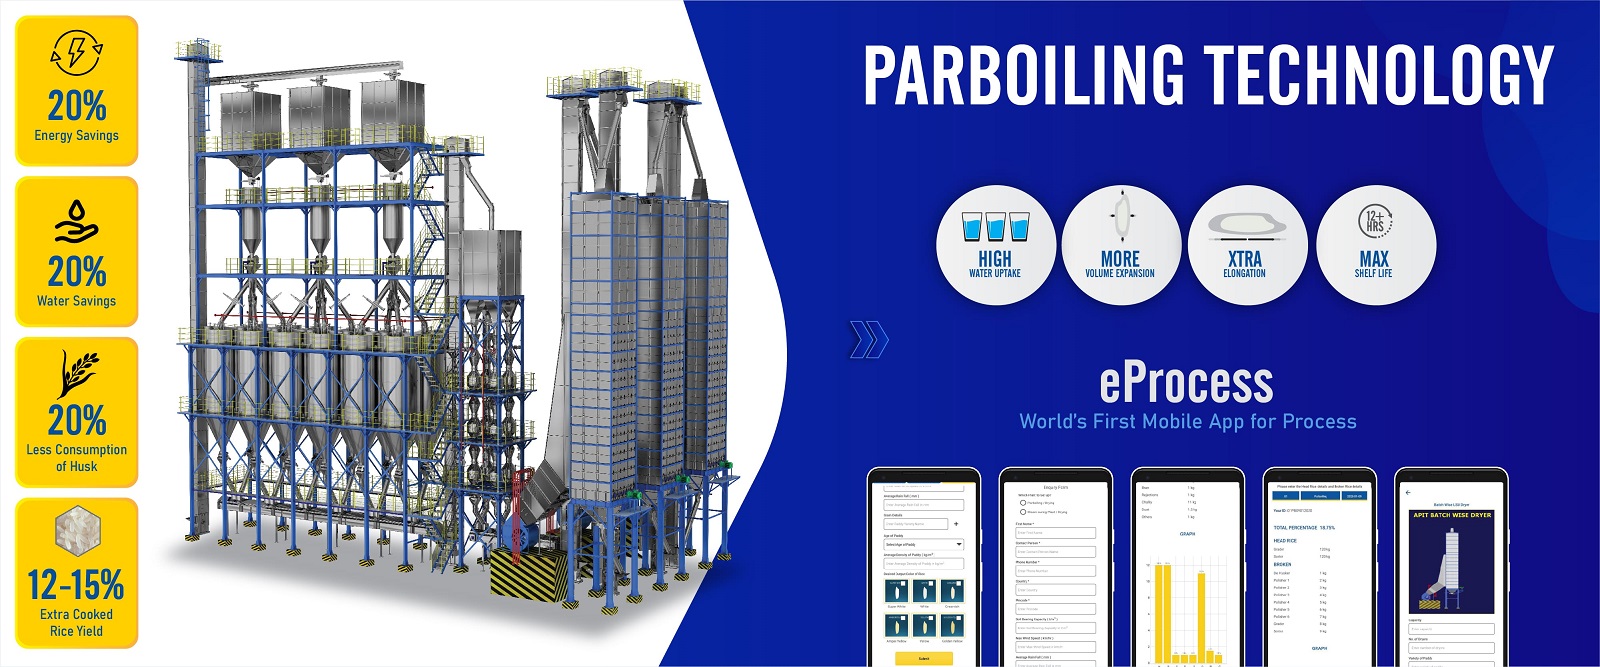 Parboiling Technology